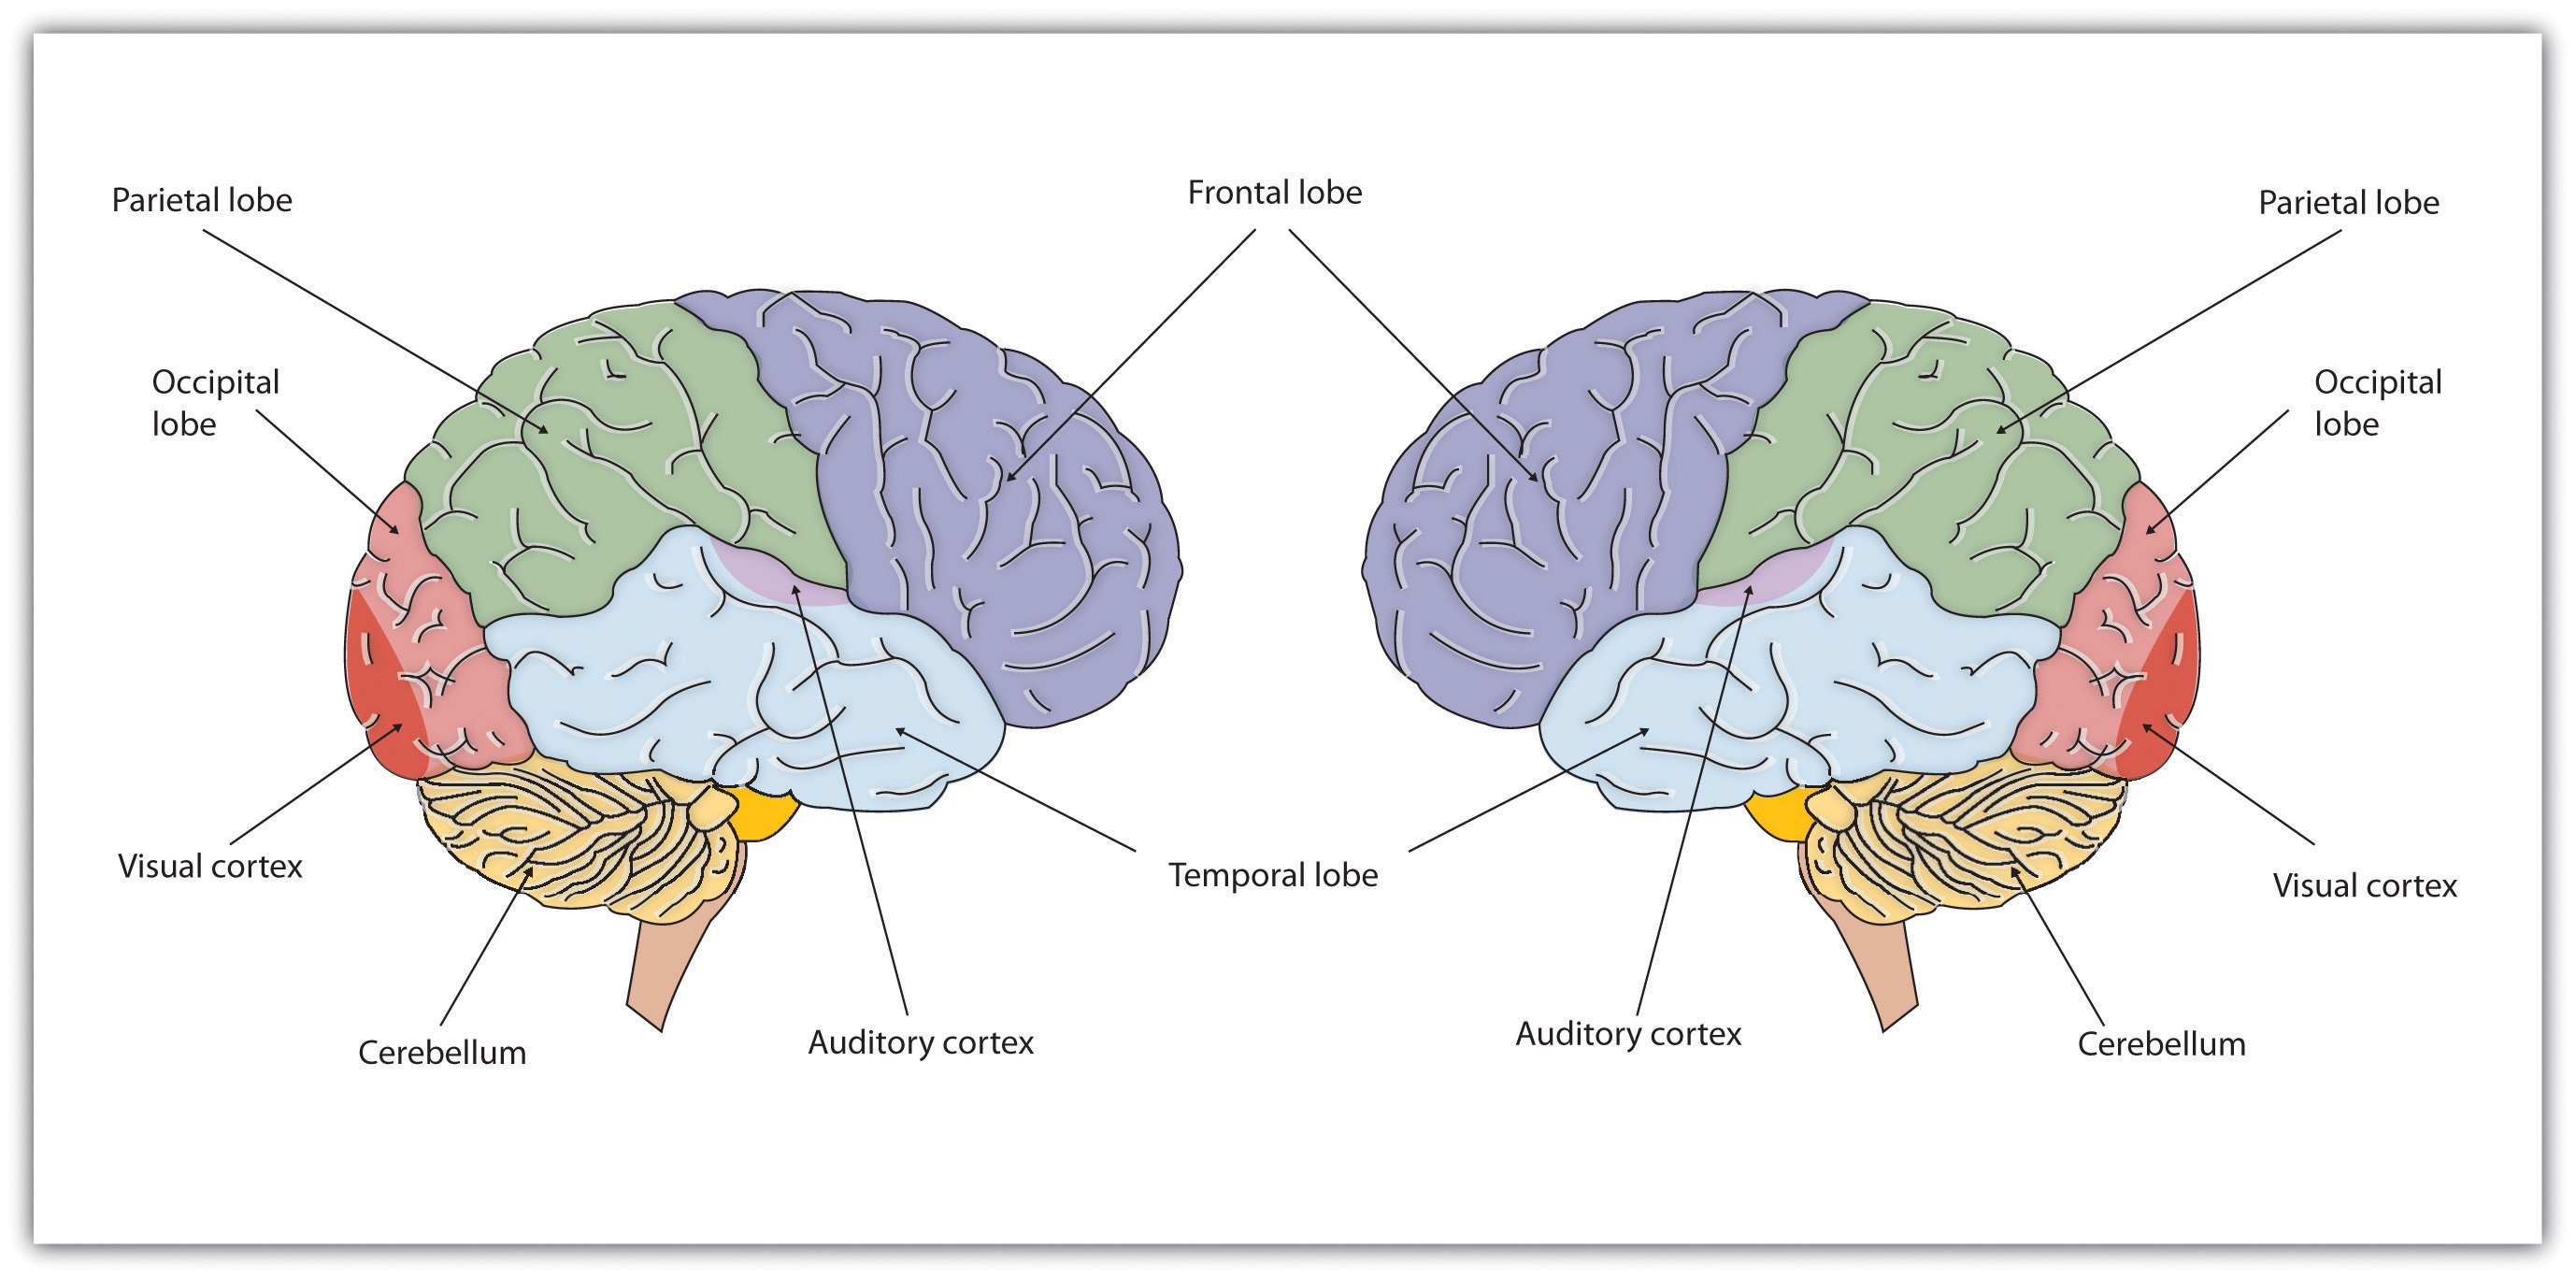 Color coded drawings of left and right hemispheres showing the four lobes of the cerebral cortex and the cerebellum below.